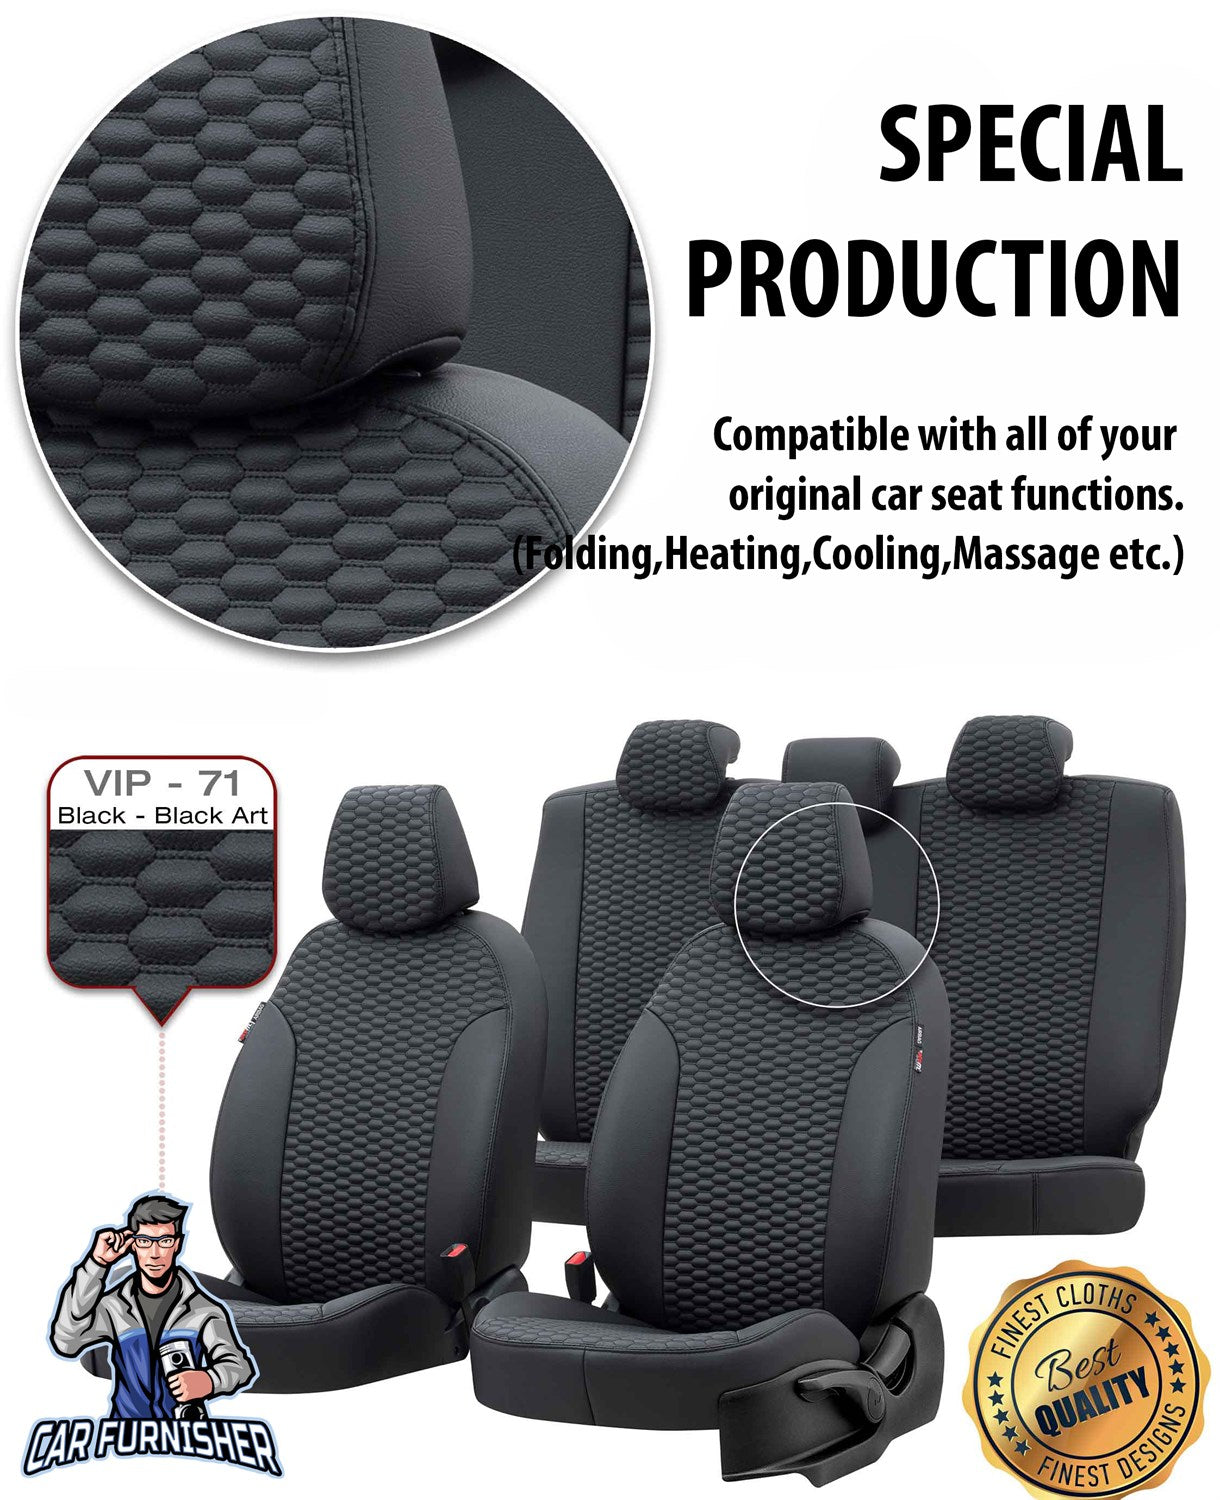 Isuzu Nlr Seat Covers Tokyo Leather Design Smoked Leather